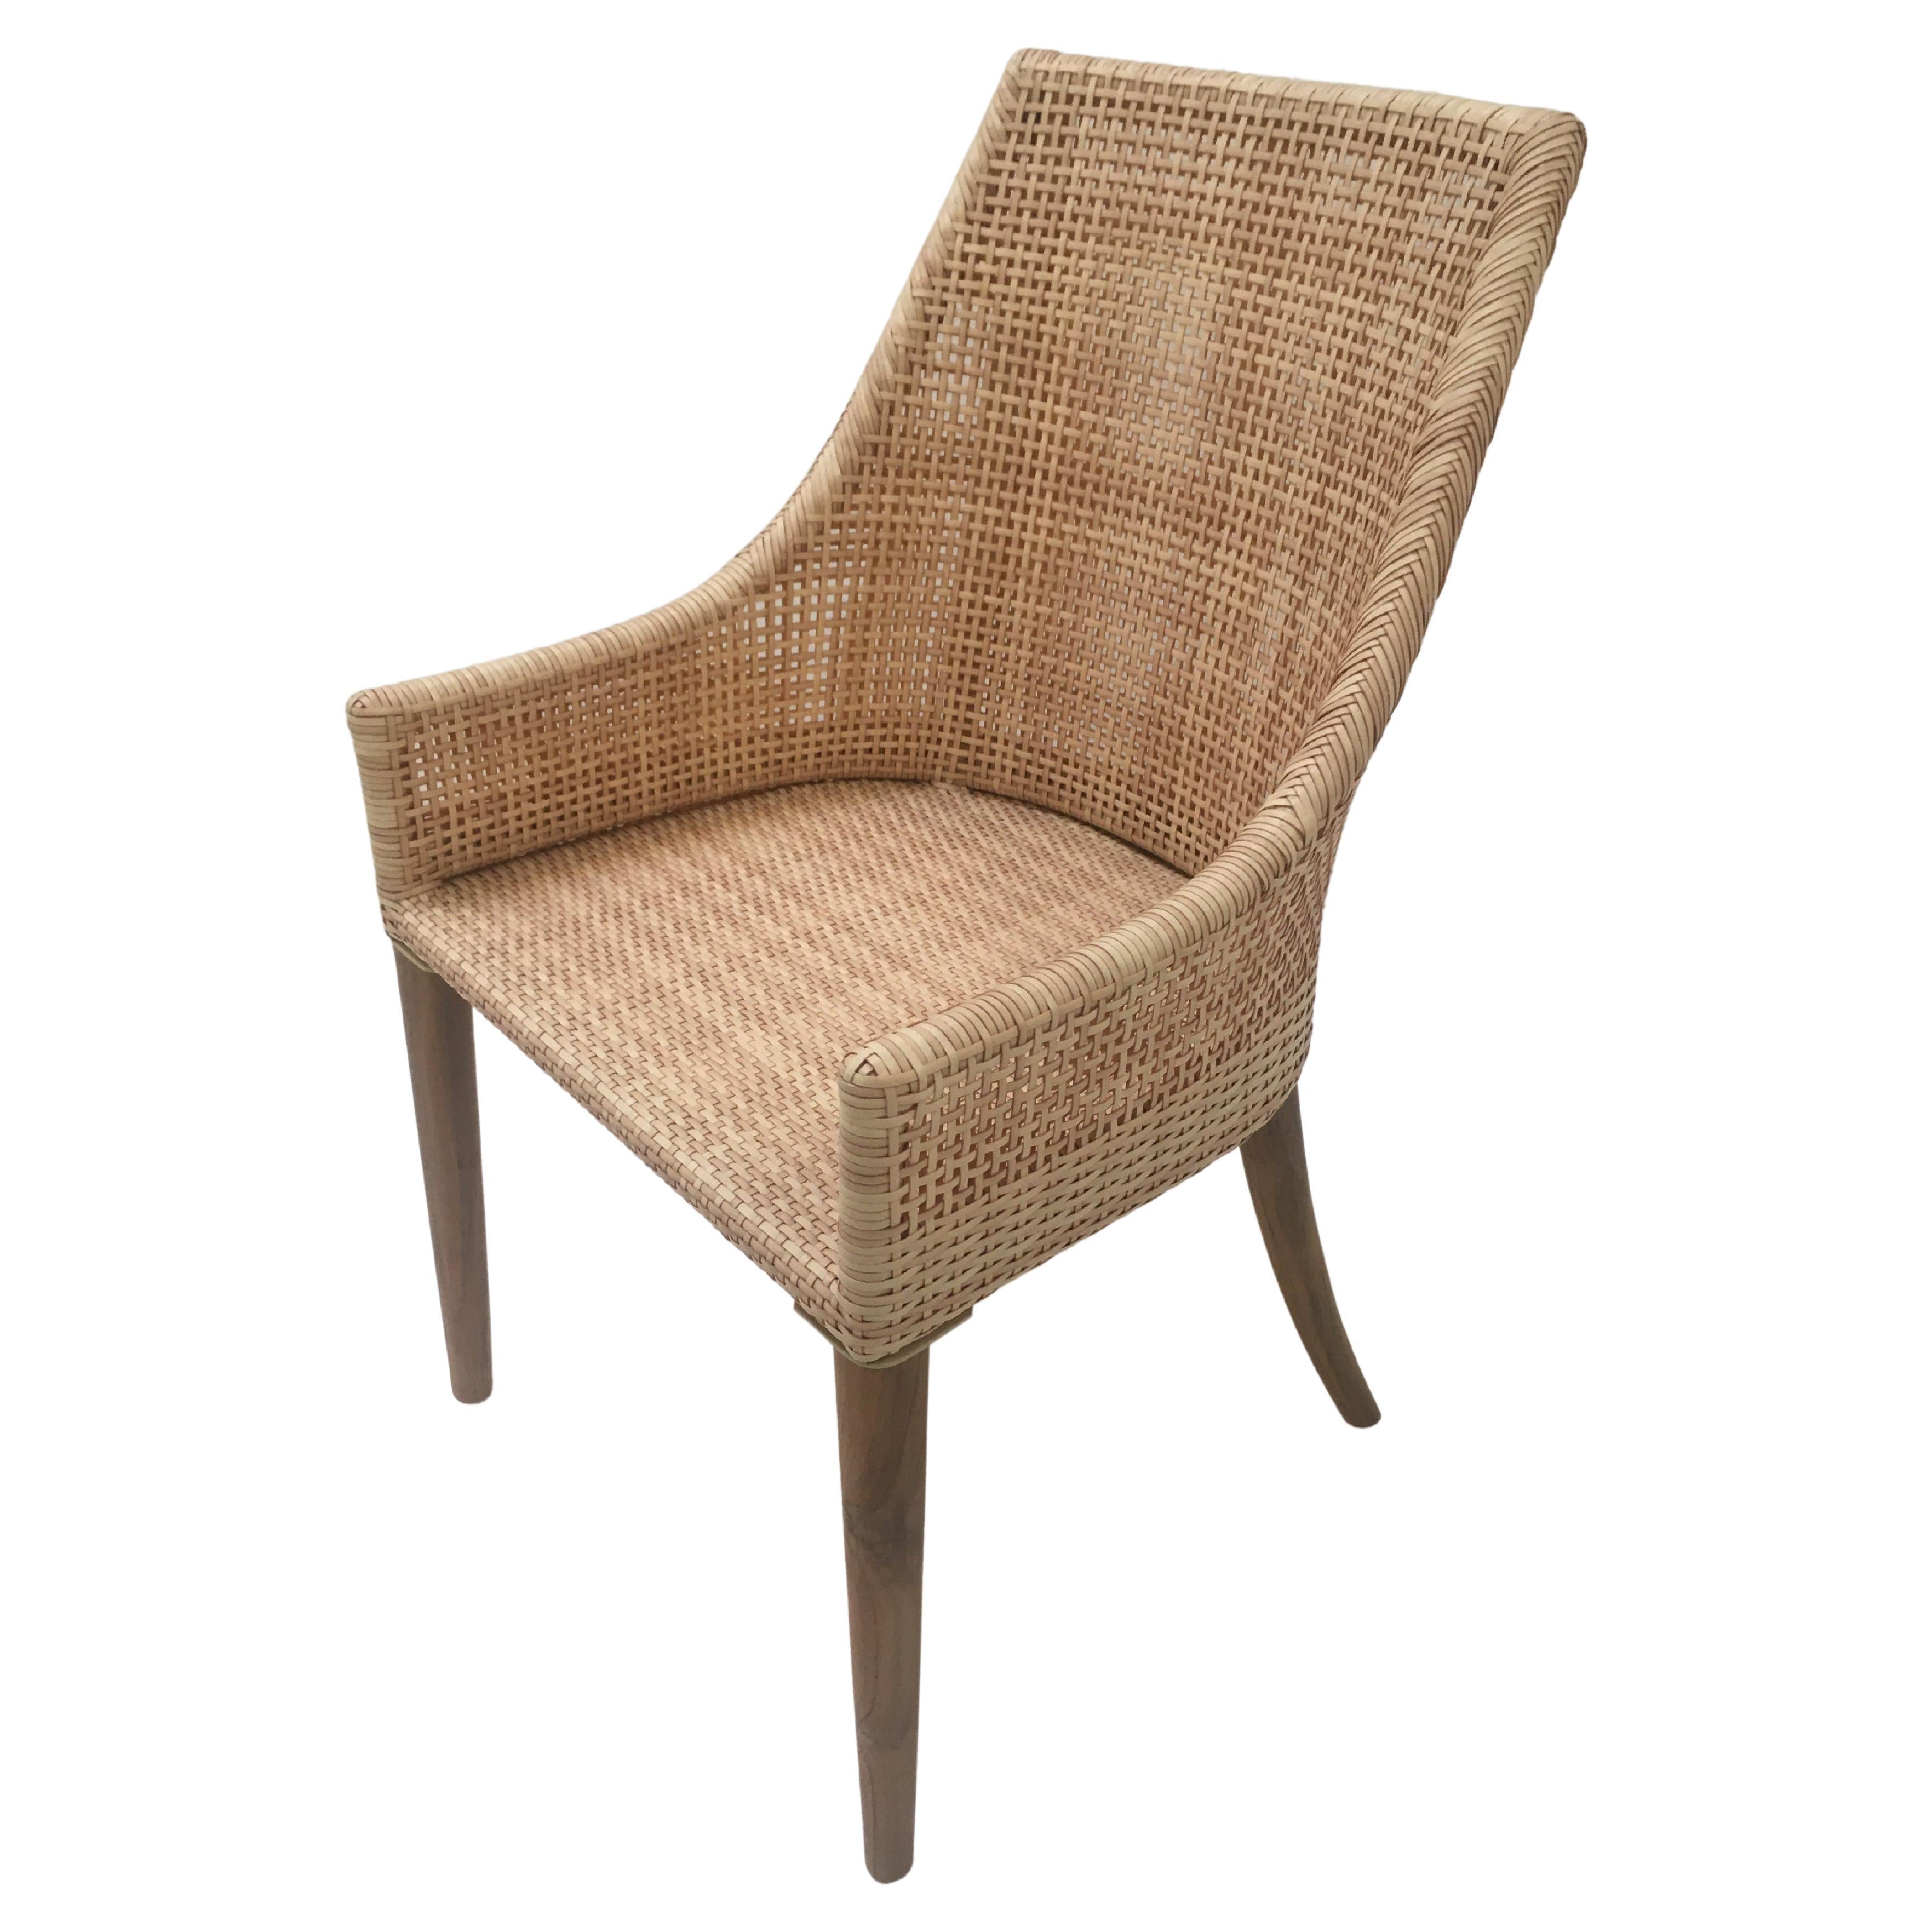 Handcrafted Braided Resin Rattan Effect and Teak Wooden Outdoor Chair For Sale